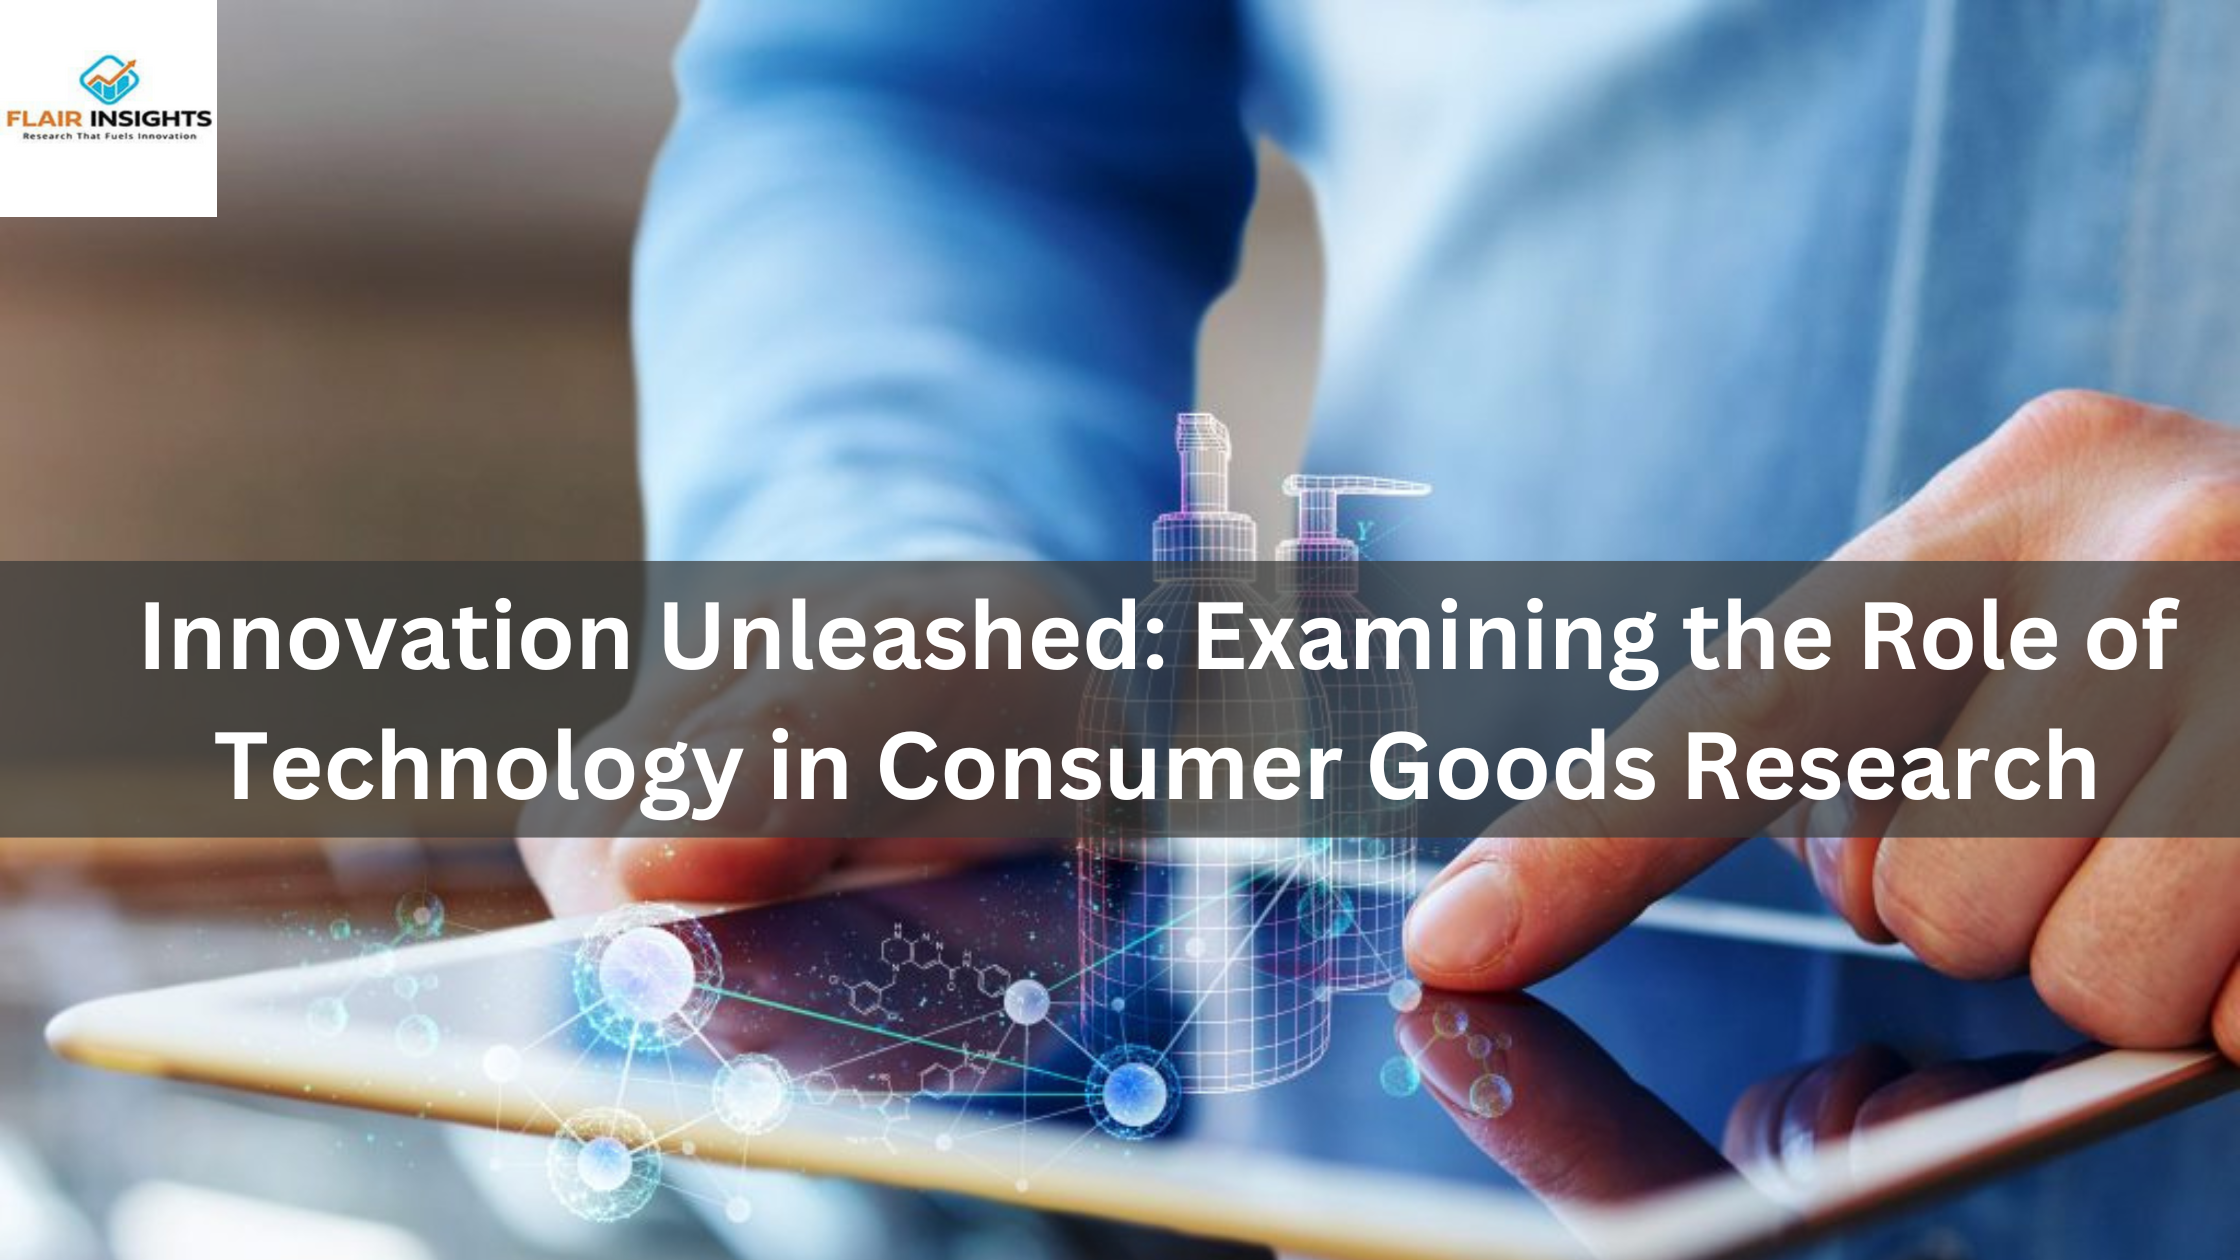 Innovation Unleashed: Examining the Role of Technology in Consumer Goods Research